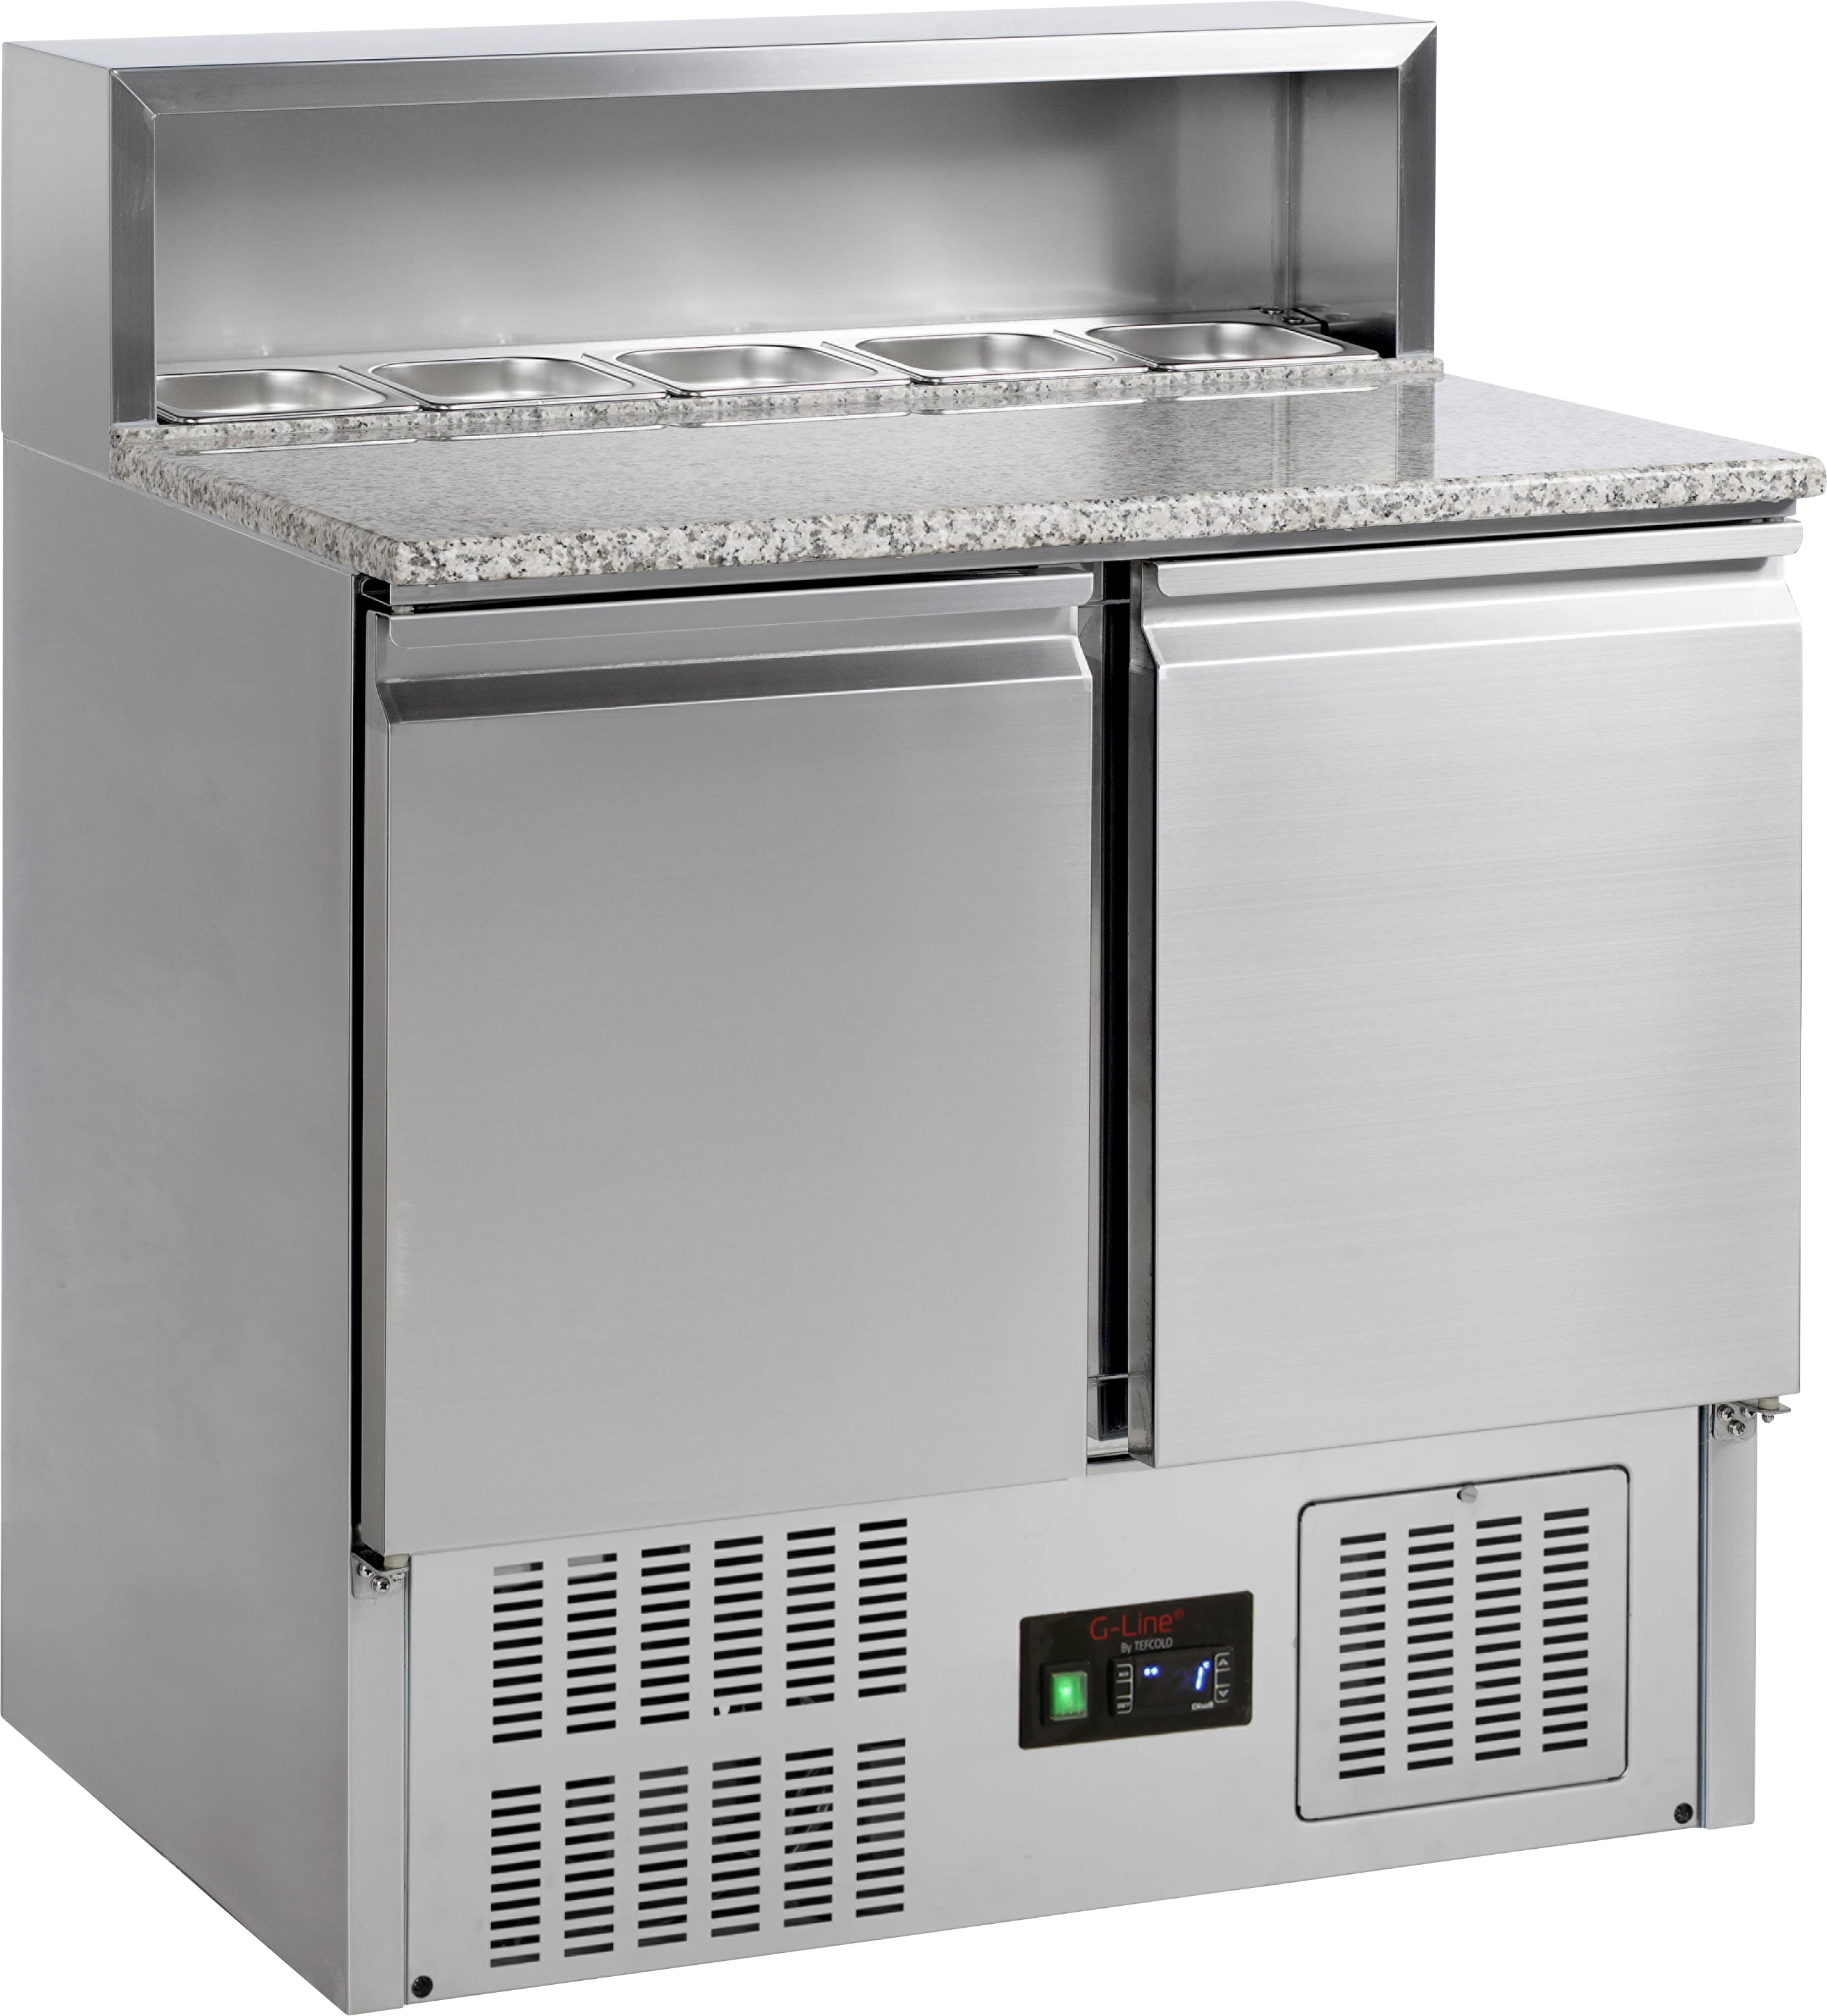 Tefcold GP92 SS201 pizzabord